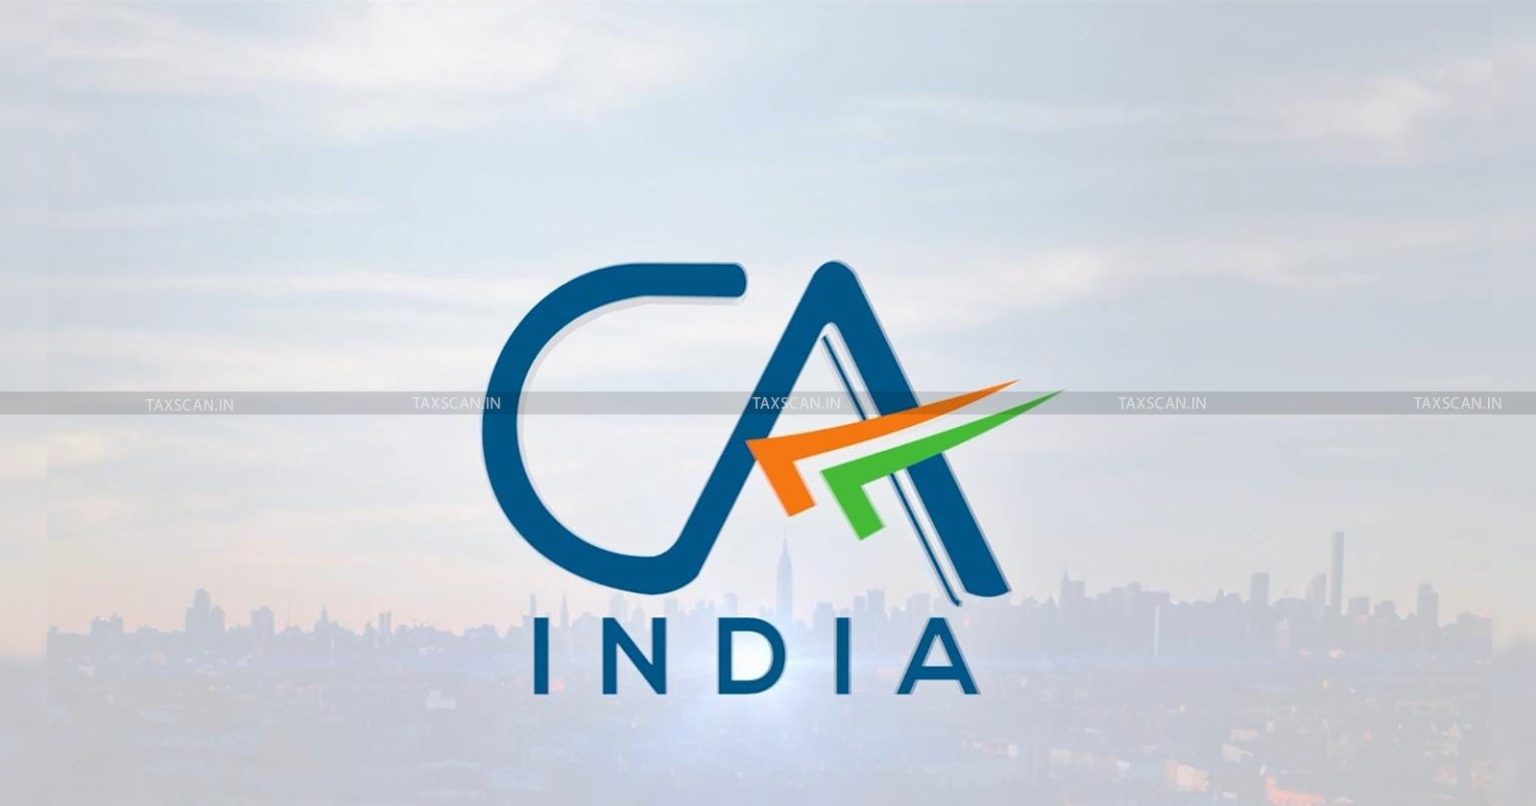 ICAI - CA Inter Results - CA Final Results - CA Inter - Chartered Accountant - taxscan